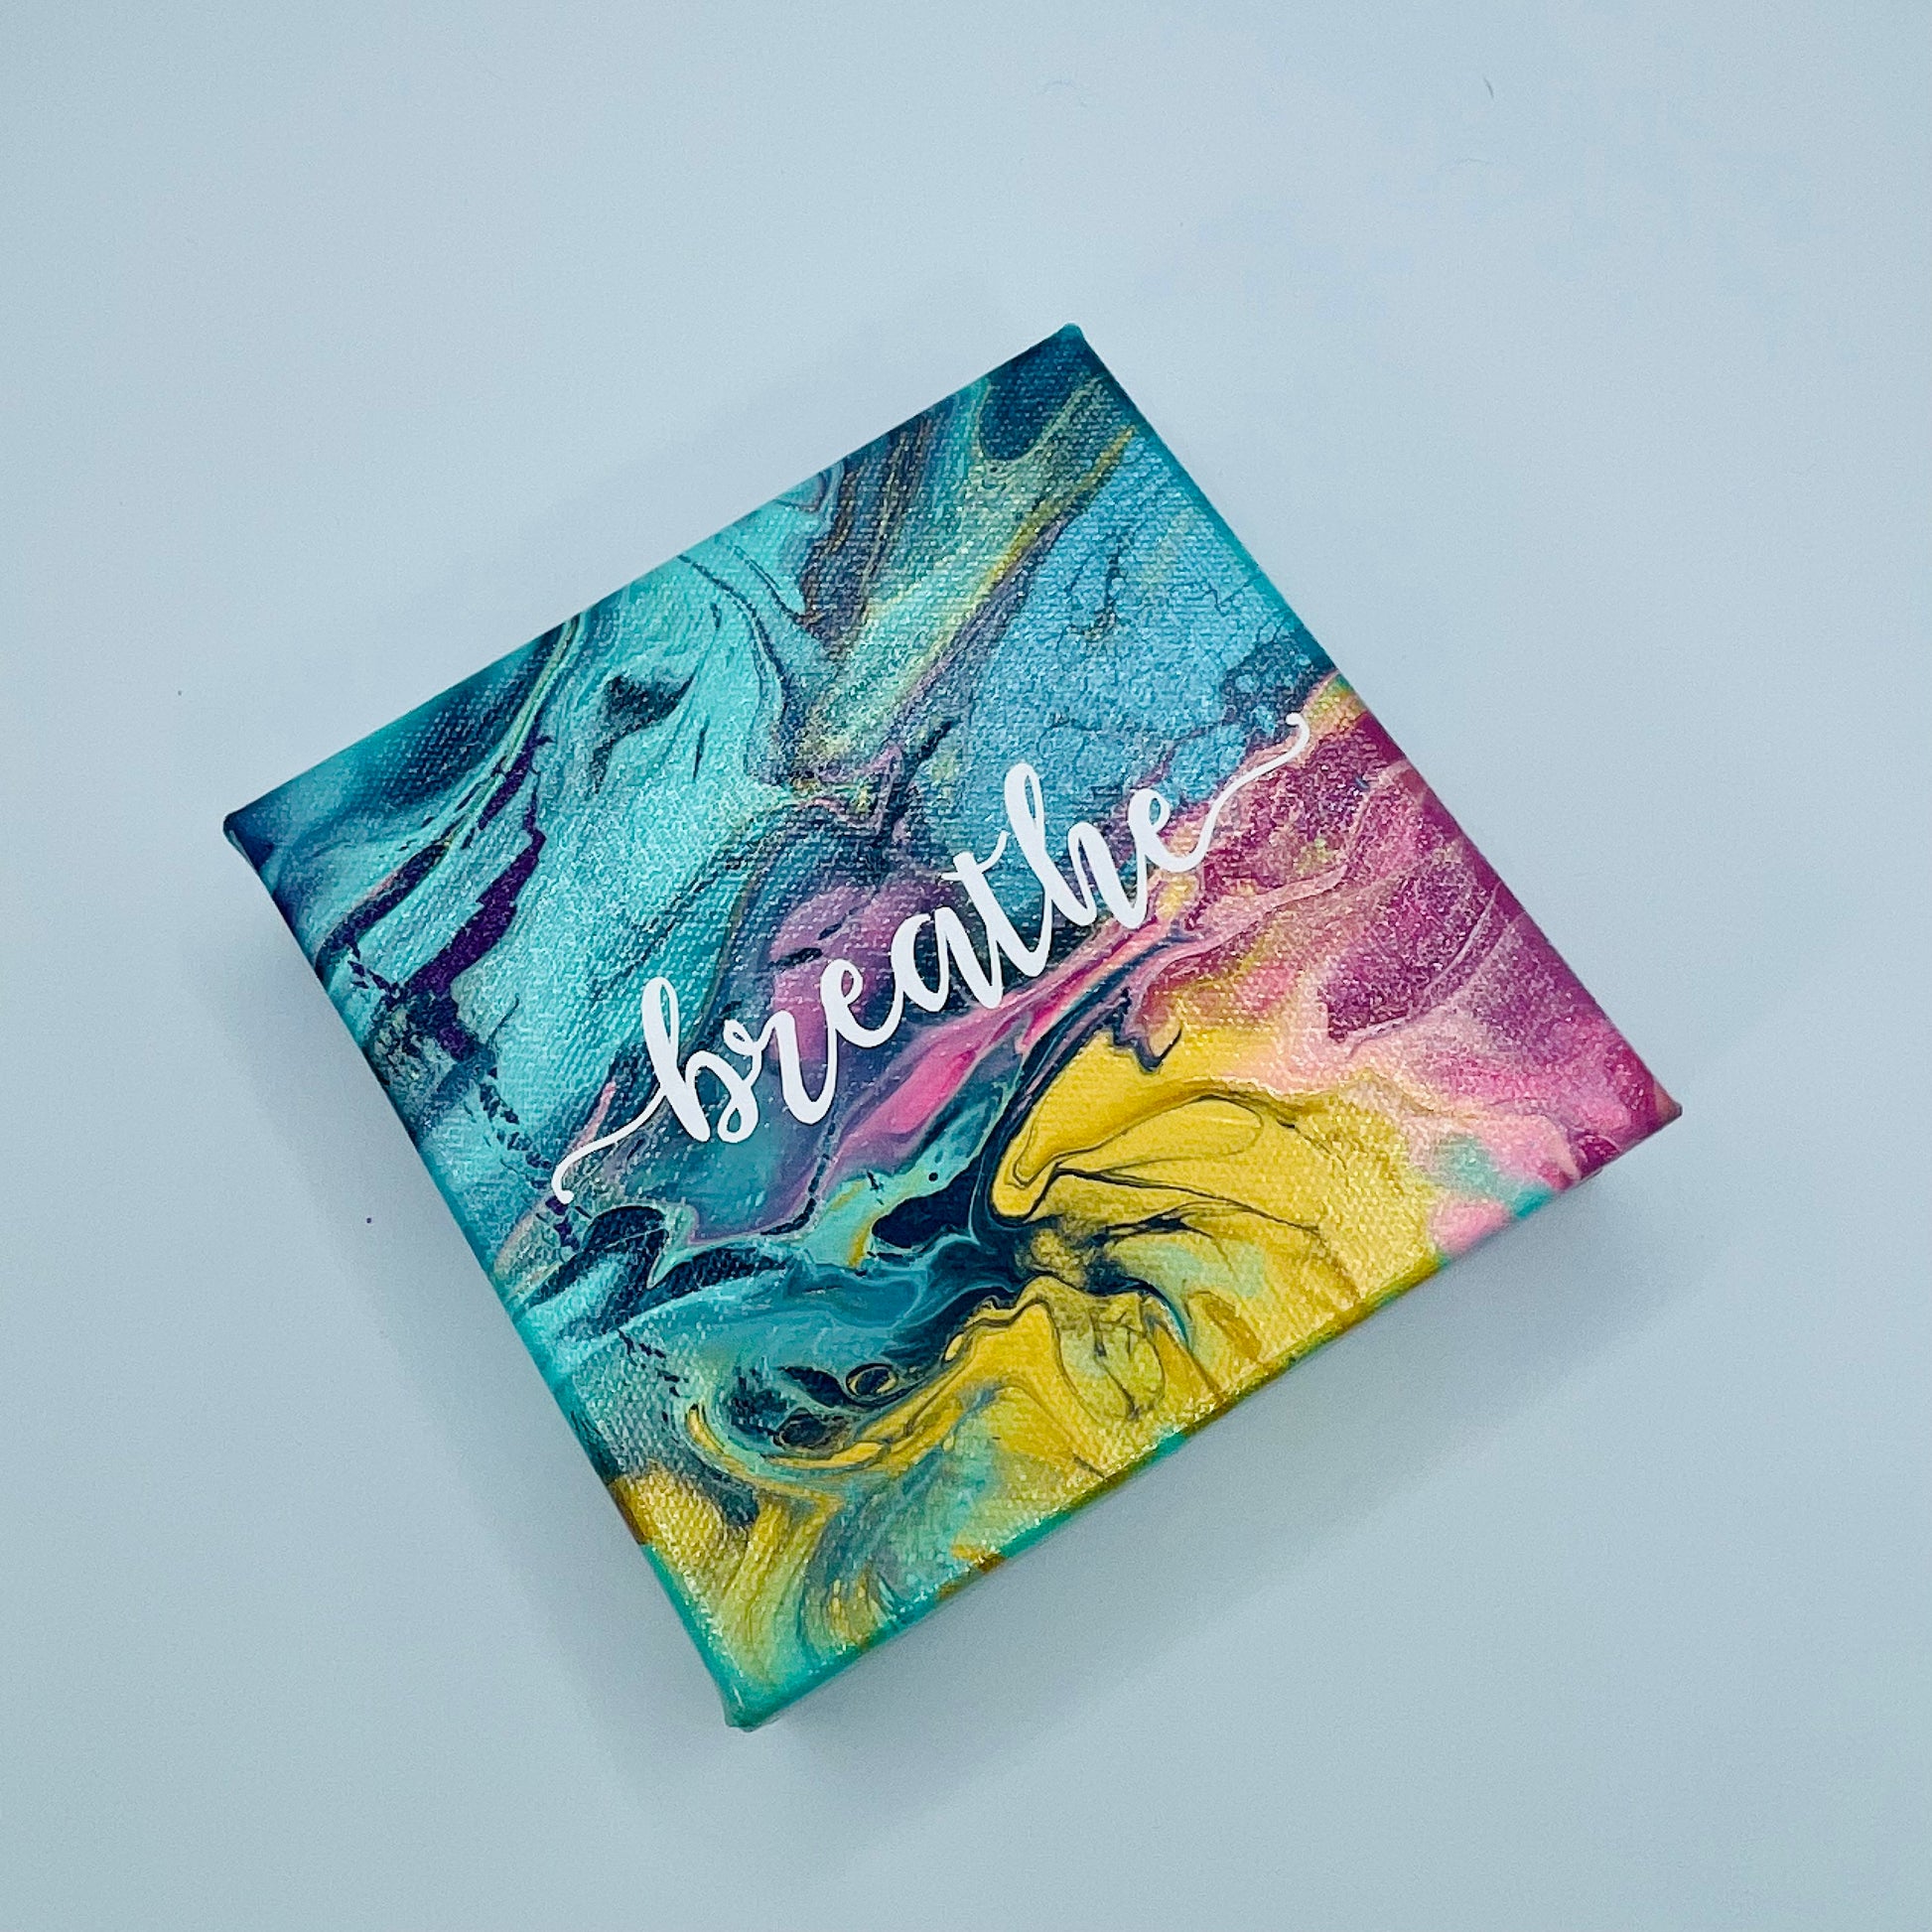 The Vidya Breathe Block. A colorful hand painted painting that says 'breathe'